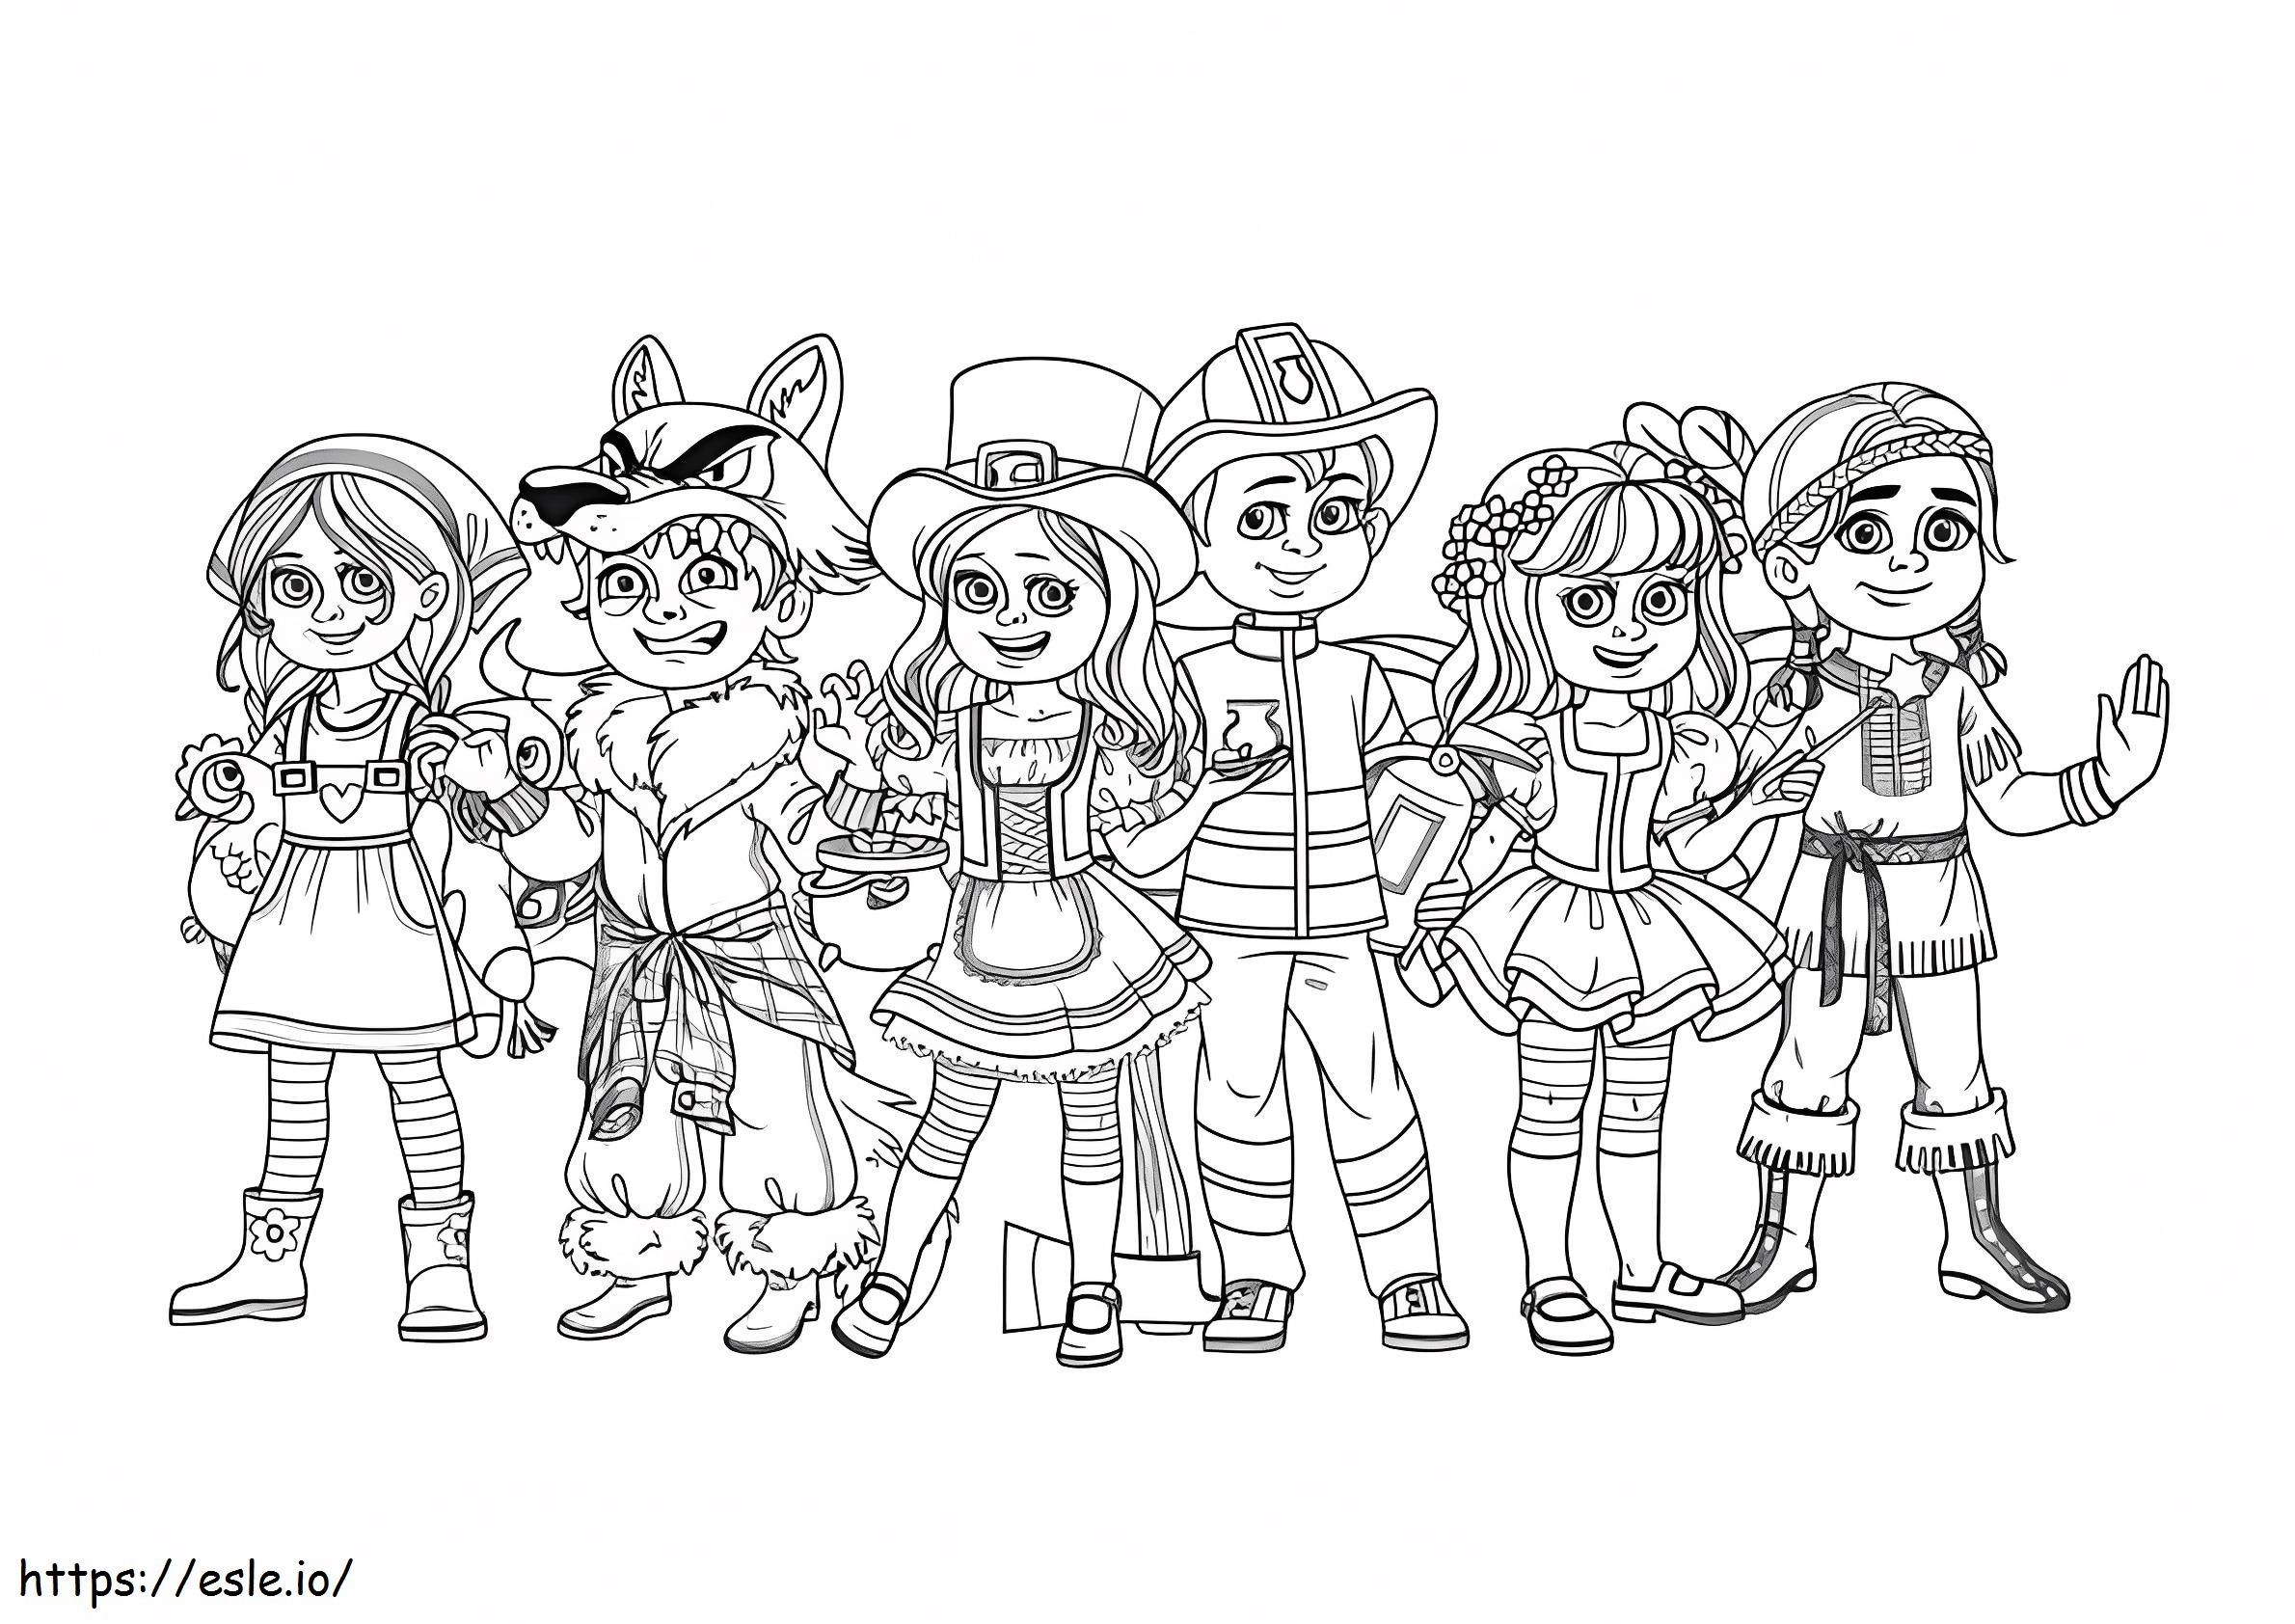 The Carnival Parade coloring page